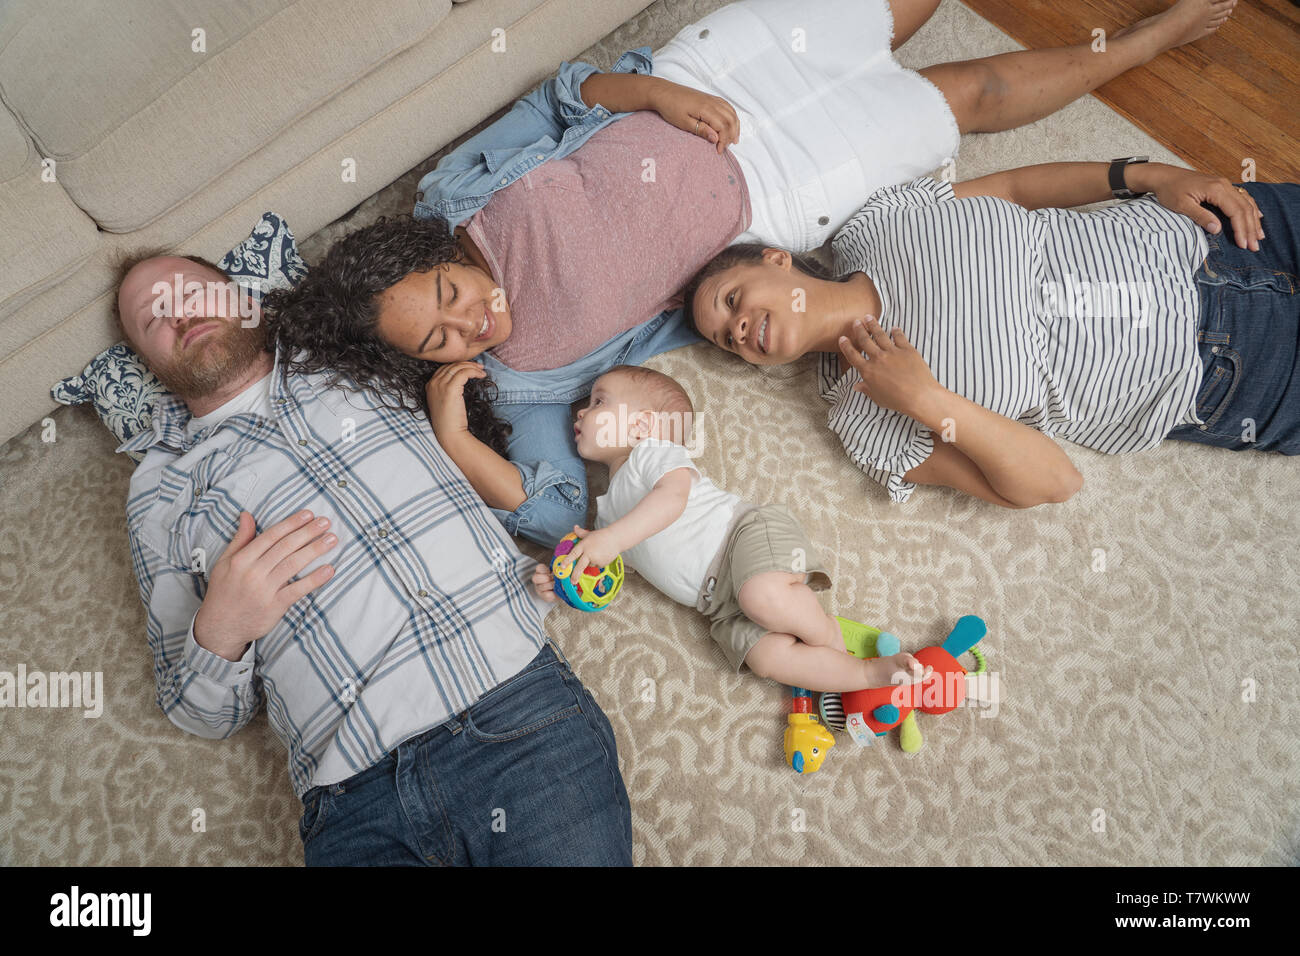 family of  4 in their home in north Philadelphia, 6 month old baby, 15 year old sister and parents. Stock Photo